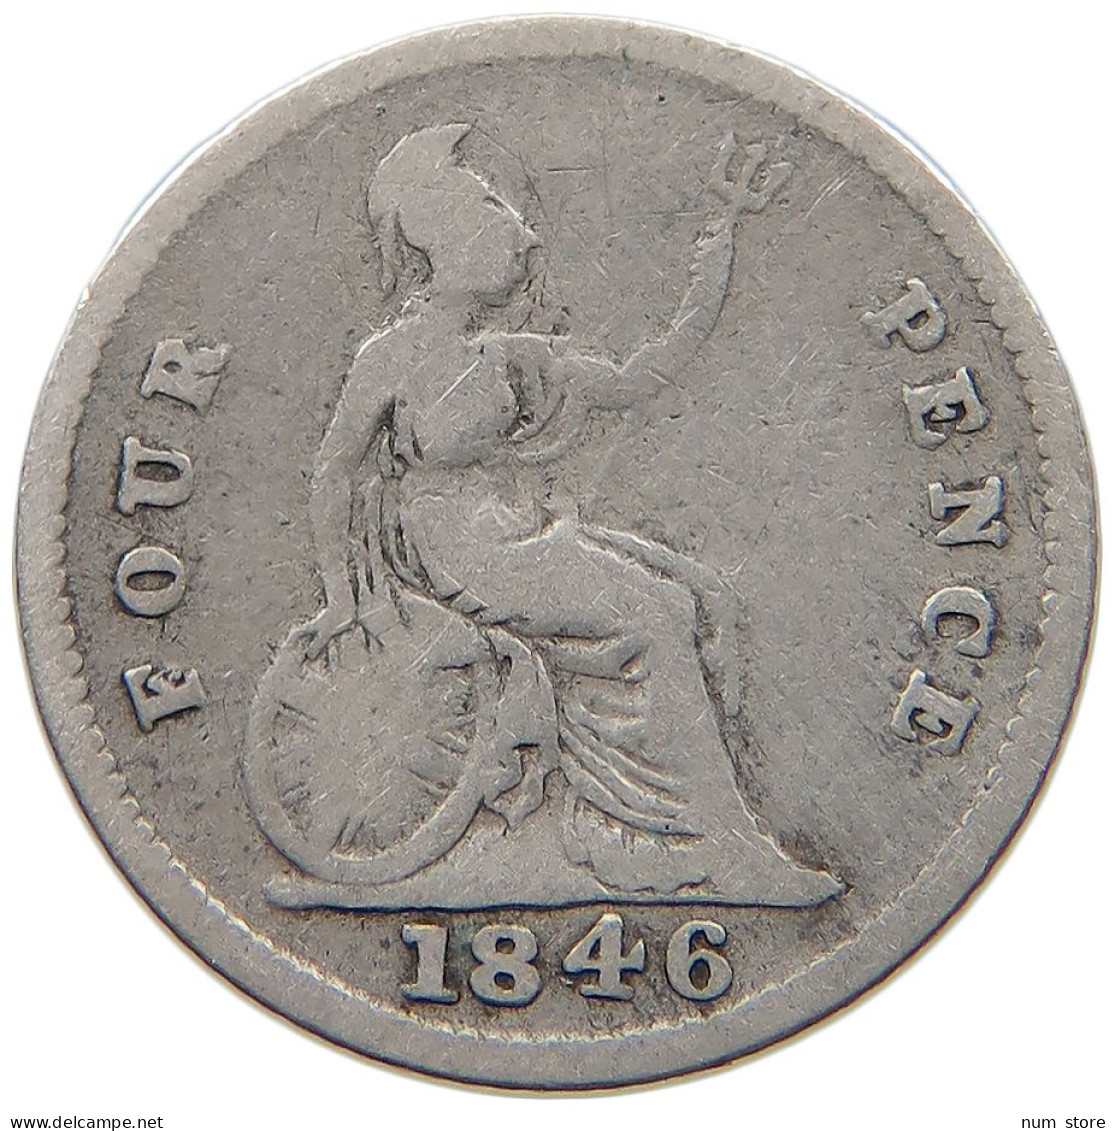 GREAT BRITAIN FOURPENCE 1846 Victoria 1837-1901 #a033 0209 - G. 4 Pence/ Groat